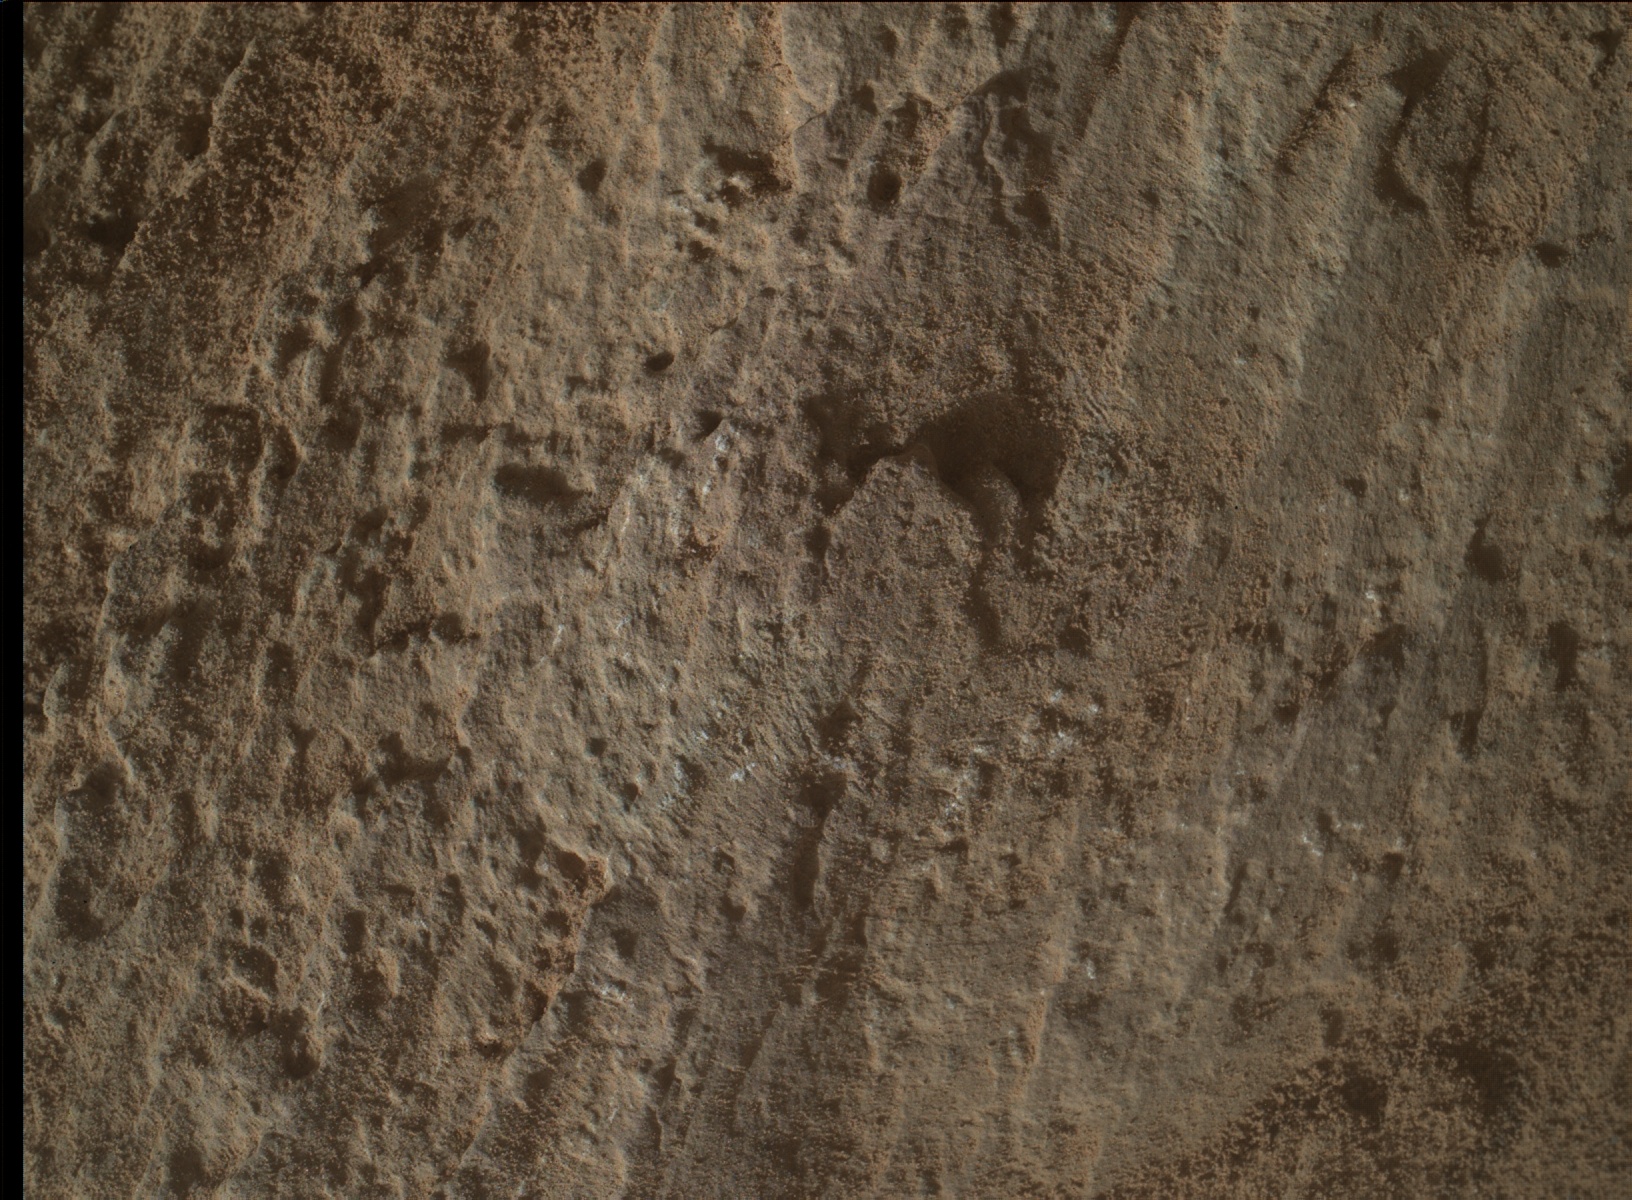 Nasa's Mars rover Curiosity acquired this image using its Mars Hand Lens Imager (MAHLI) on Sol 2581